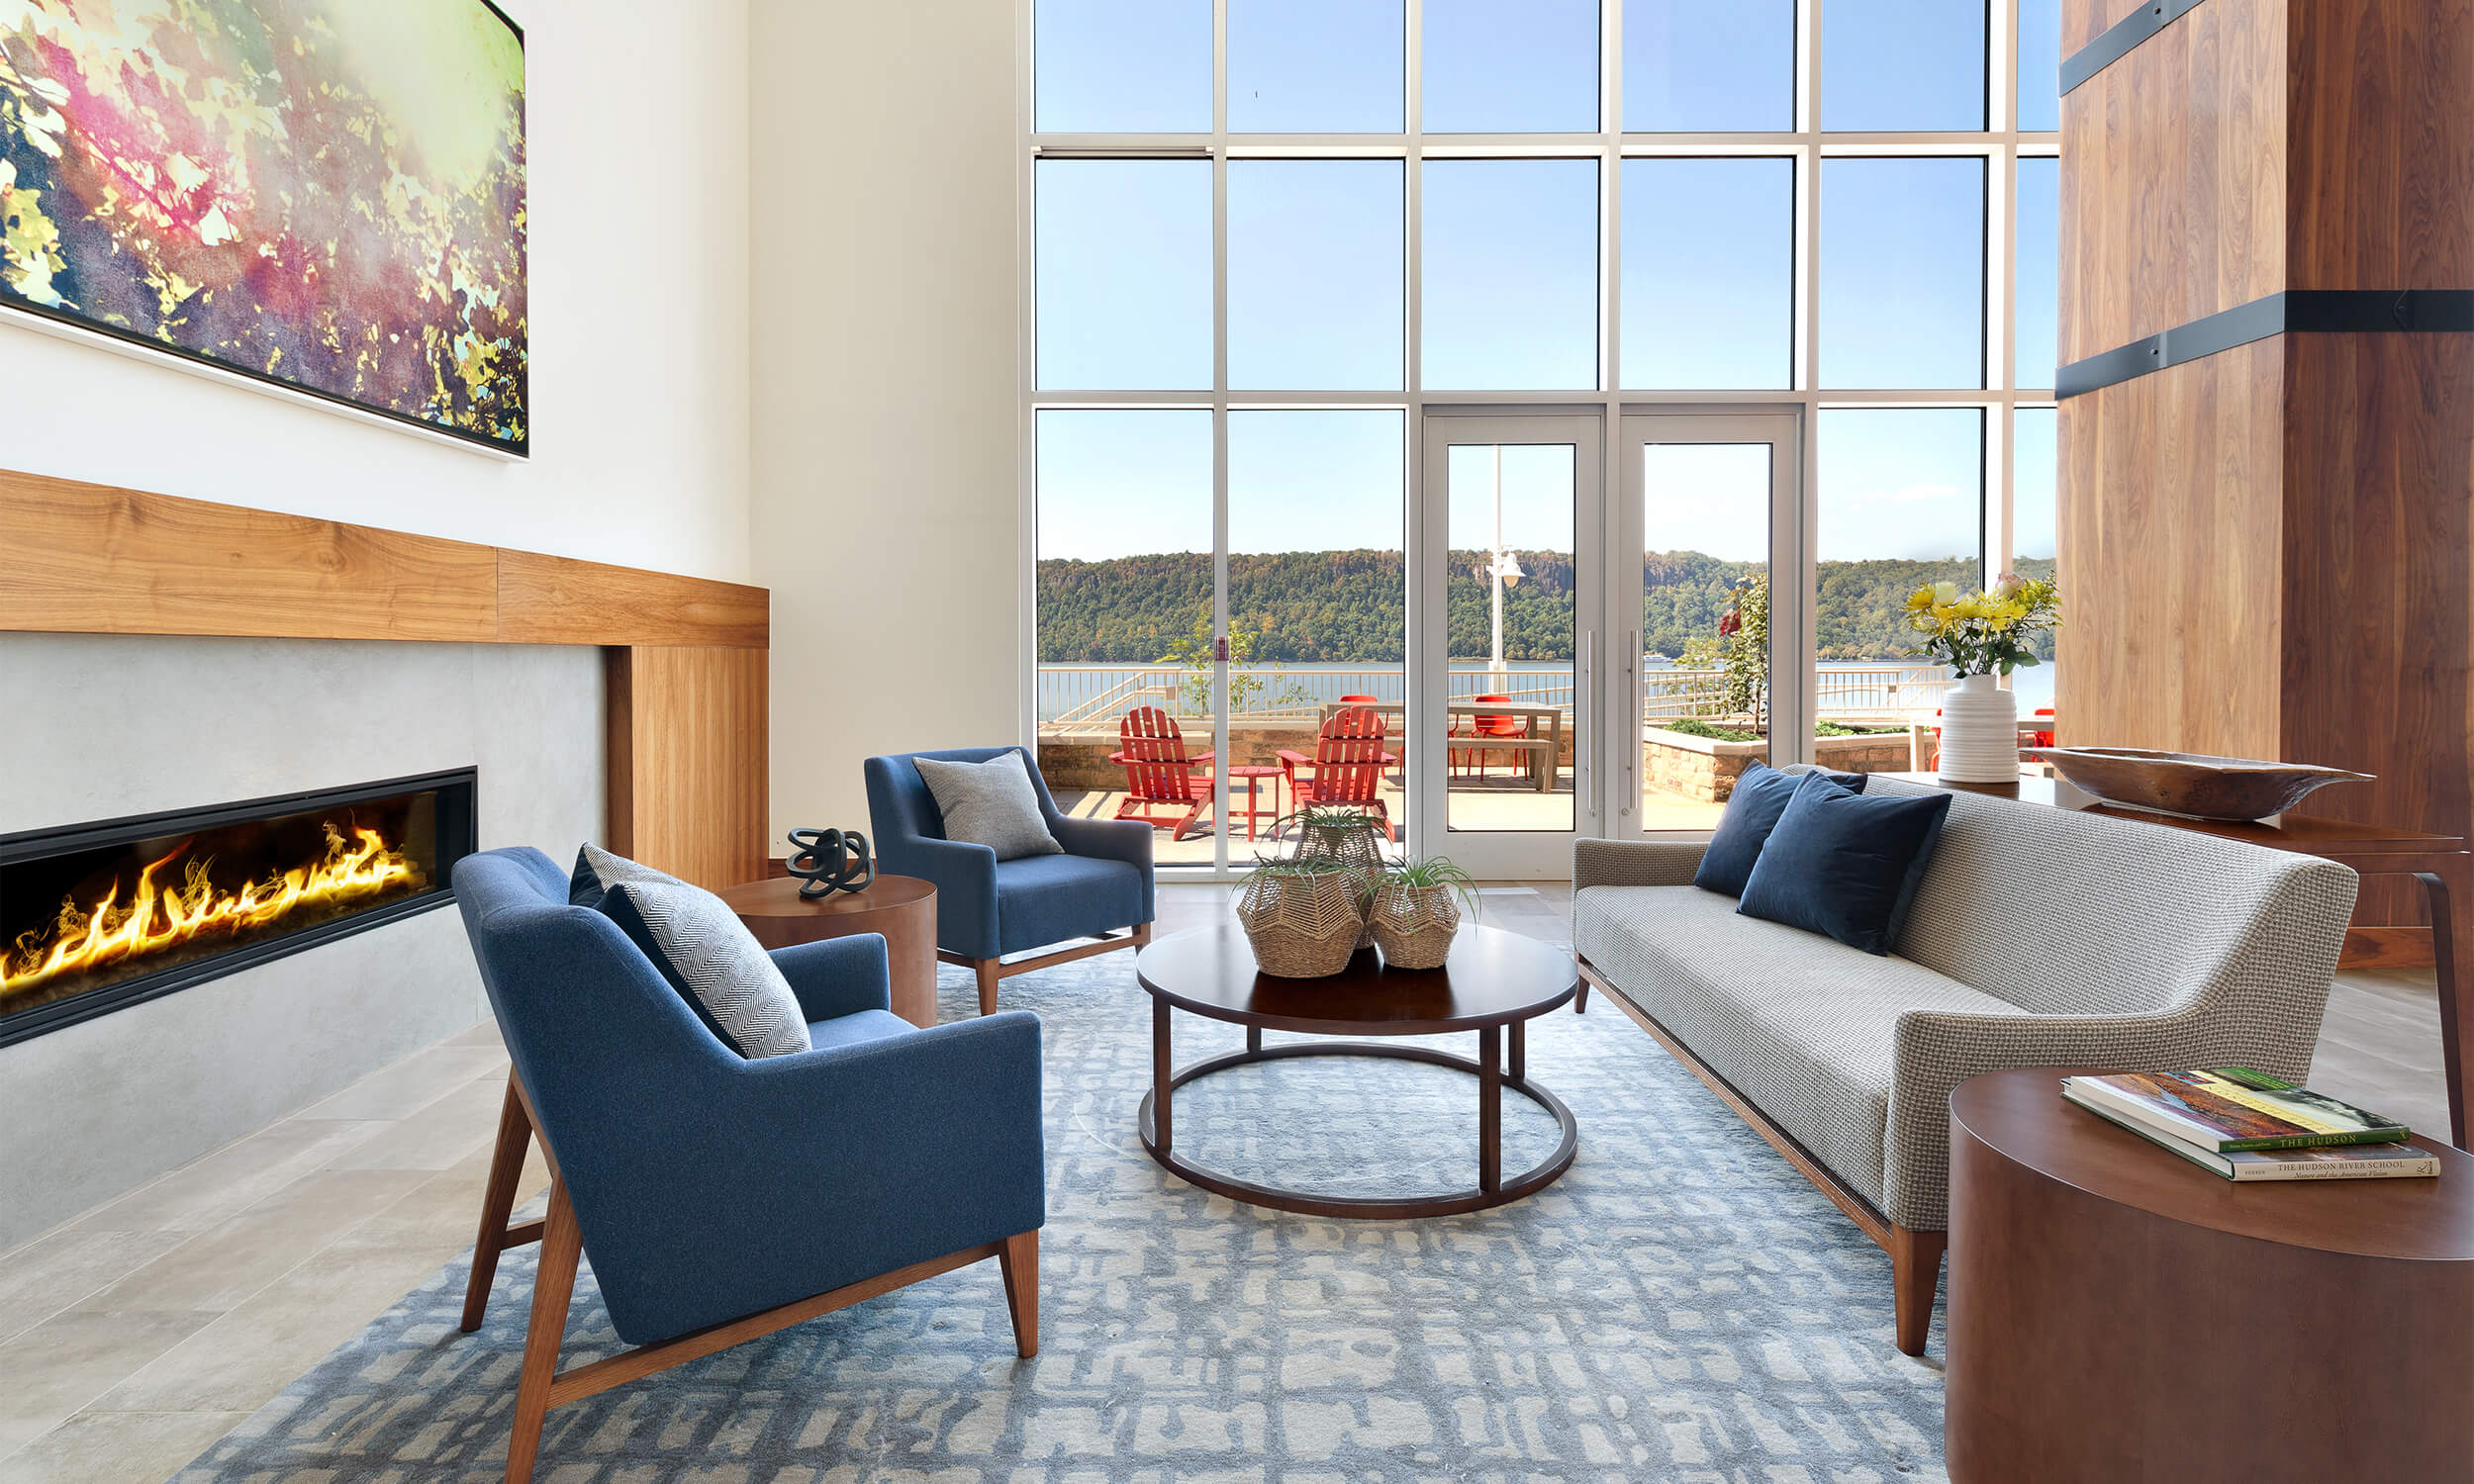 Interior view of a community room in a luxury apartment complex. The room is bright and sunny with natural light coming from large windows, and a modern fireplace on the left is flanked by blue midcentury modern upholstered chairs.